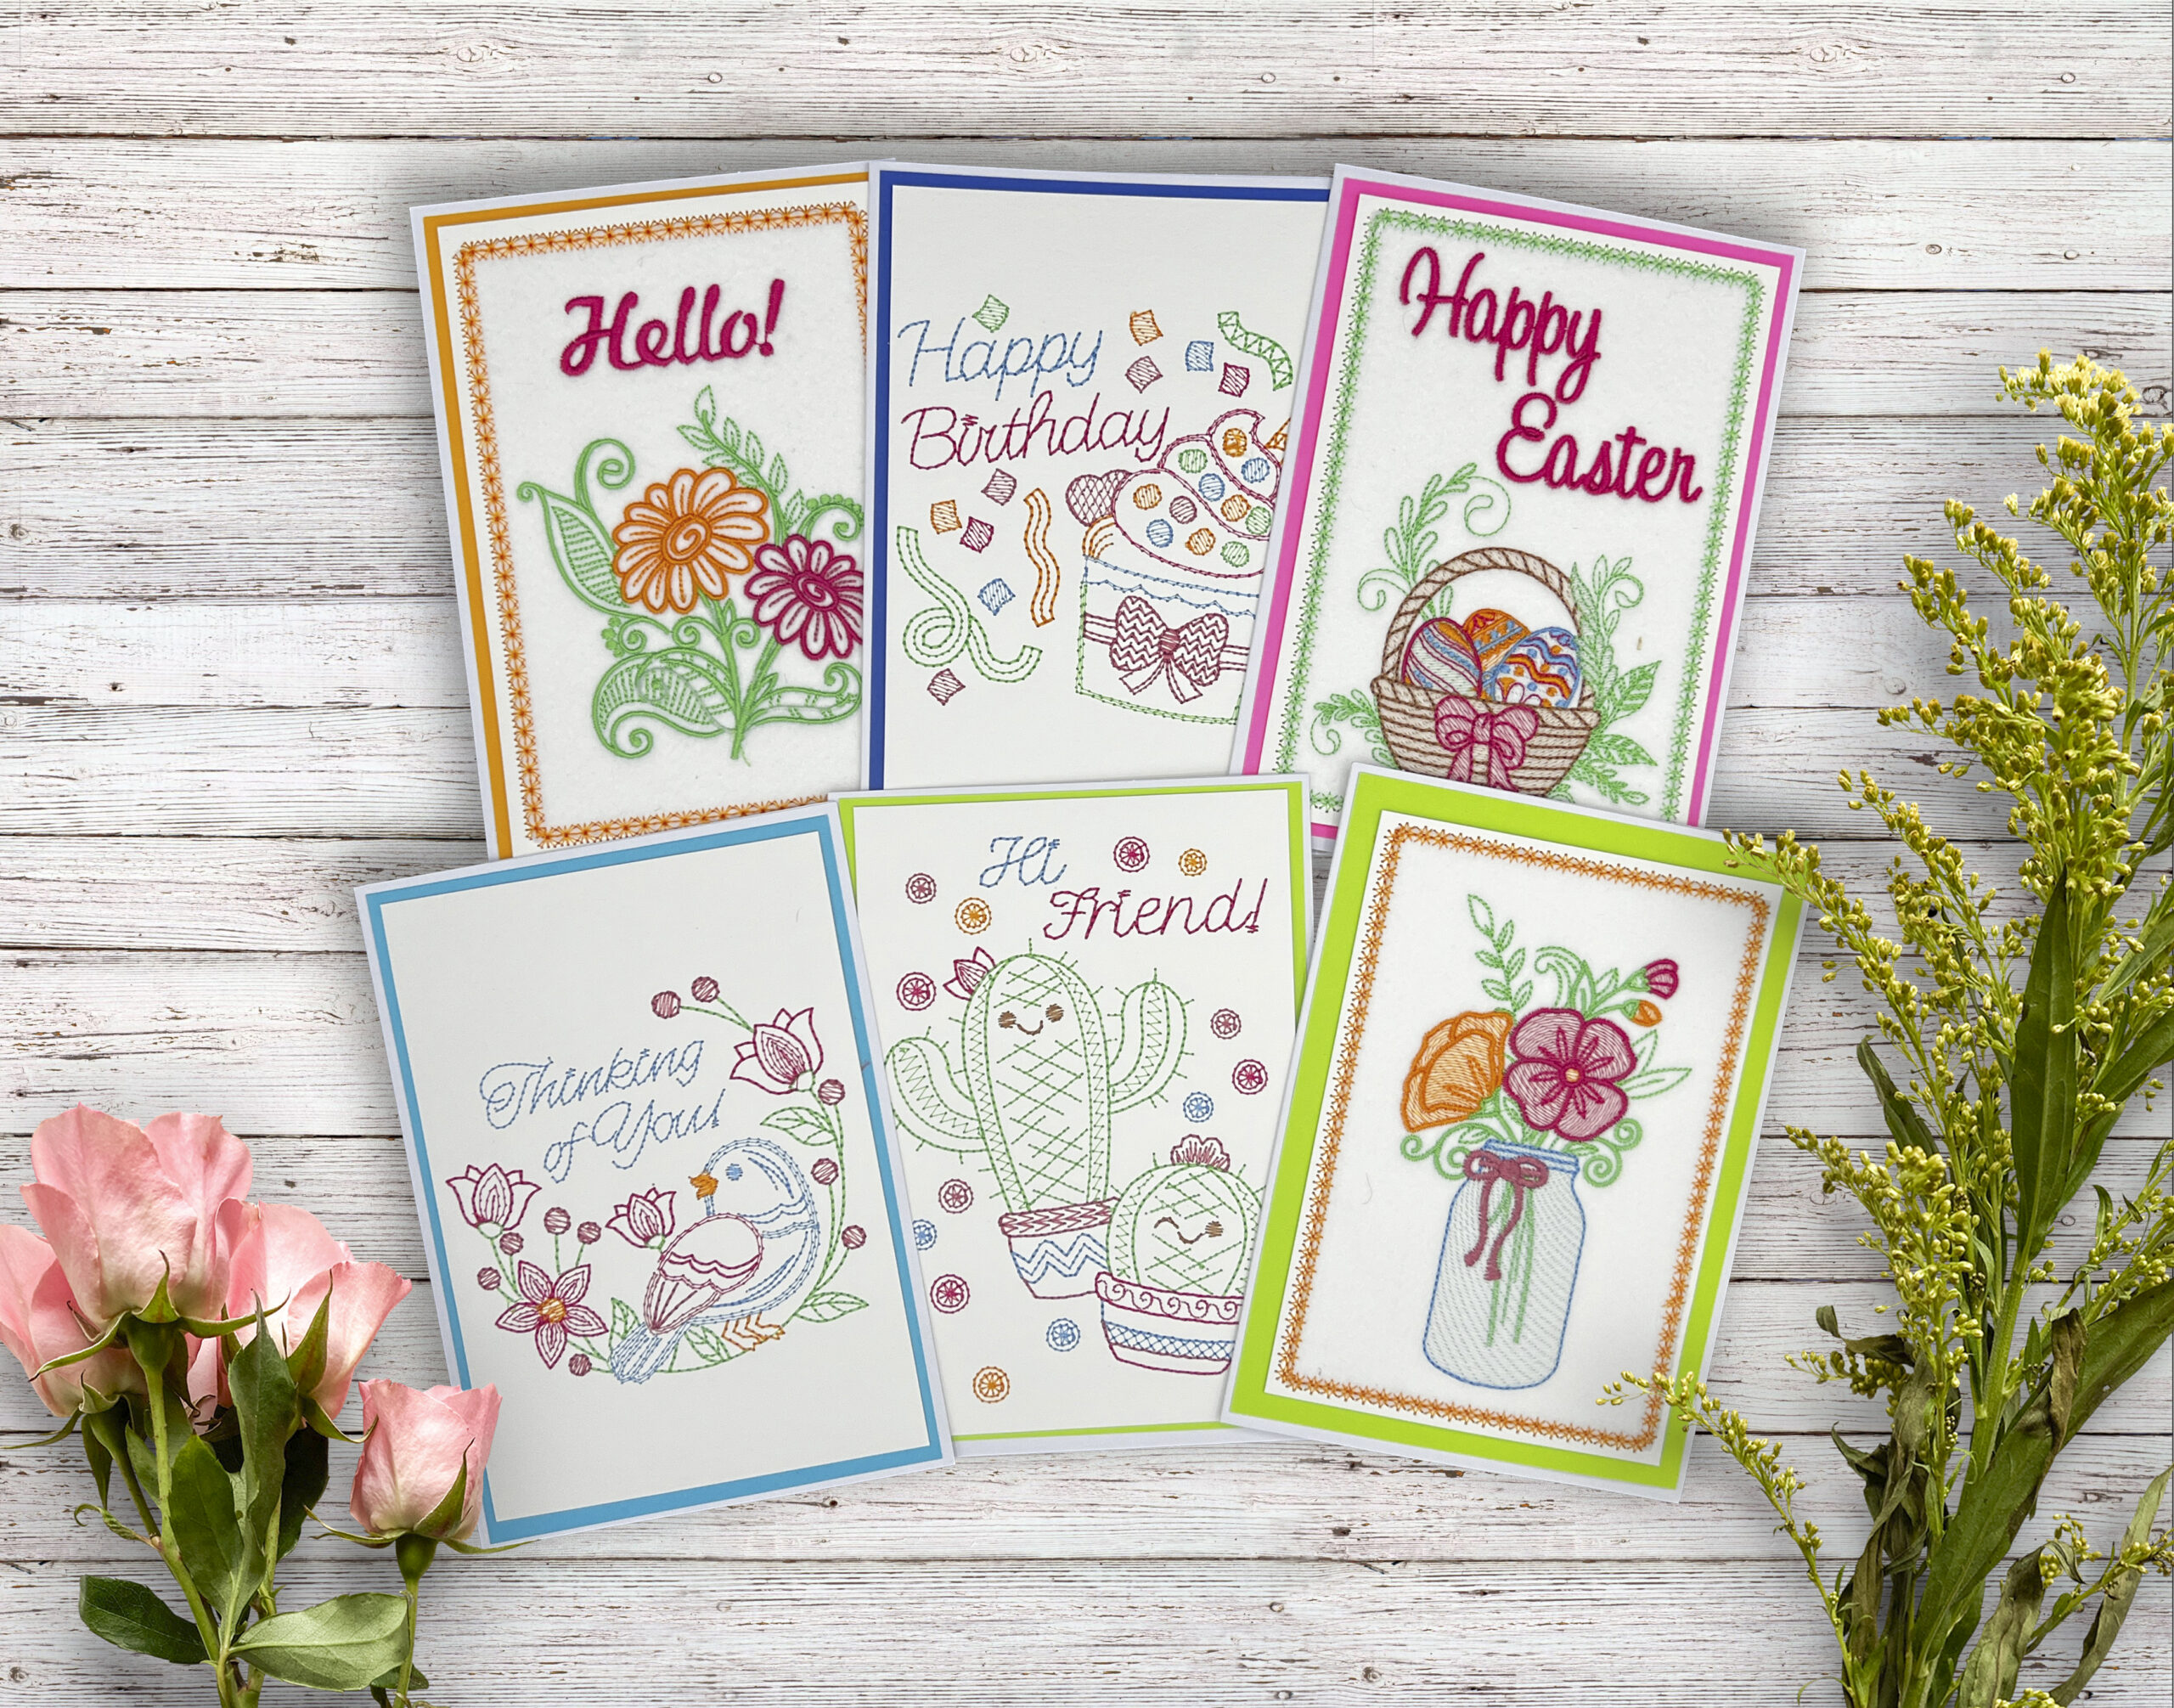 How to Make Embroidered Greeting Cards - WeAllSew